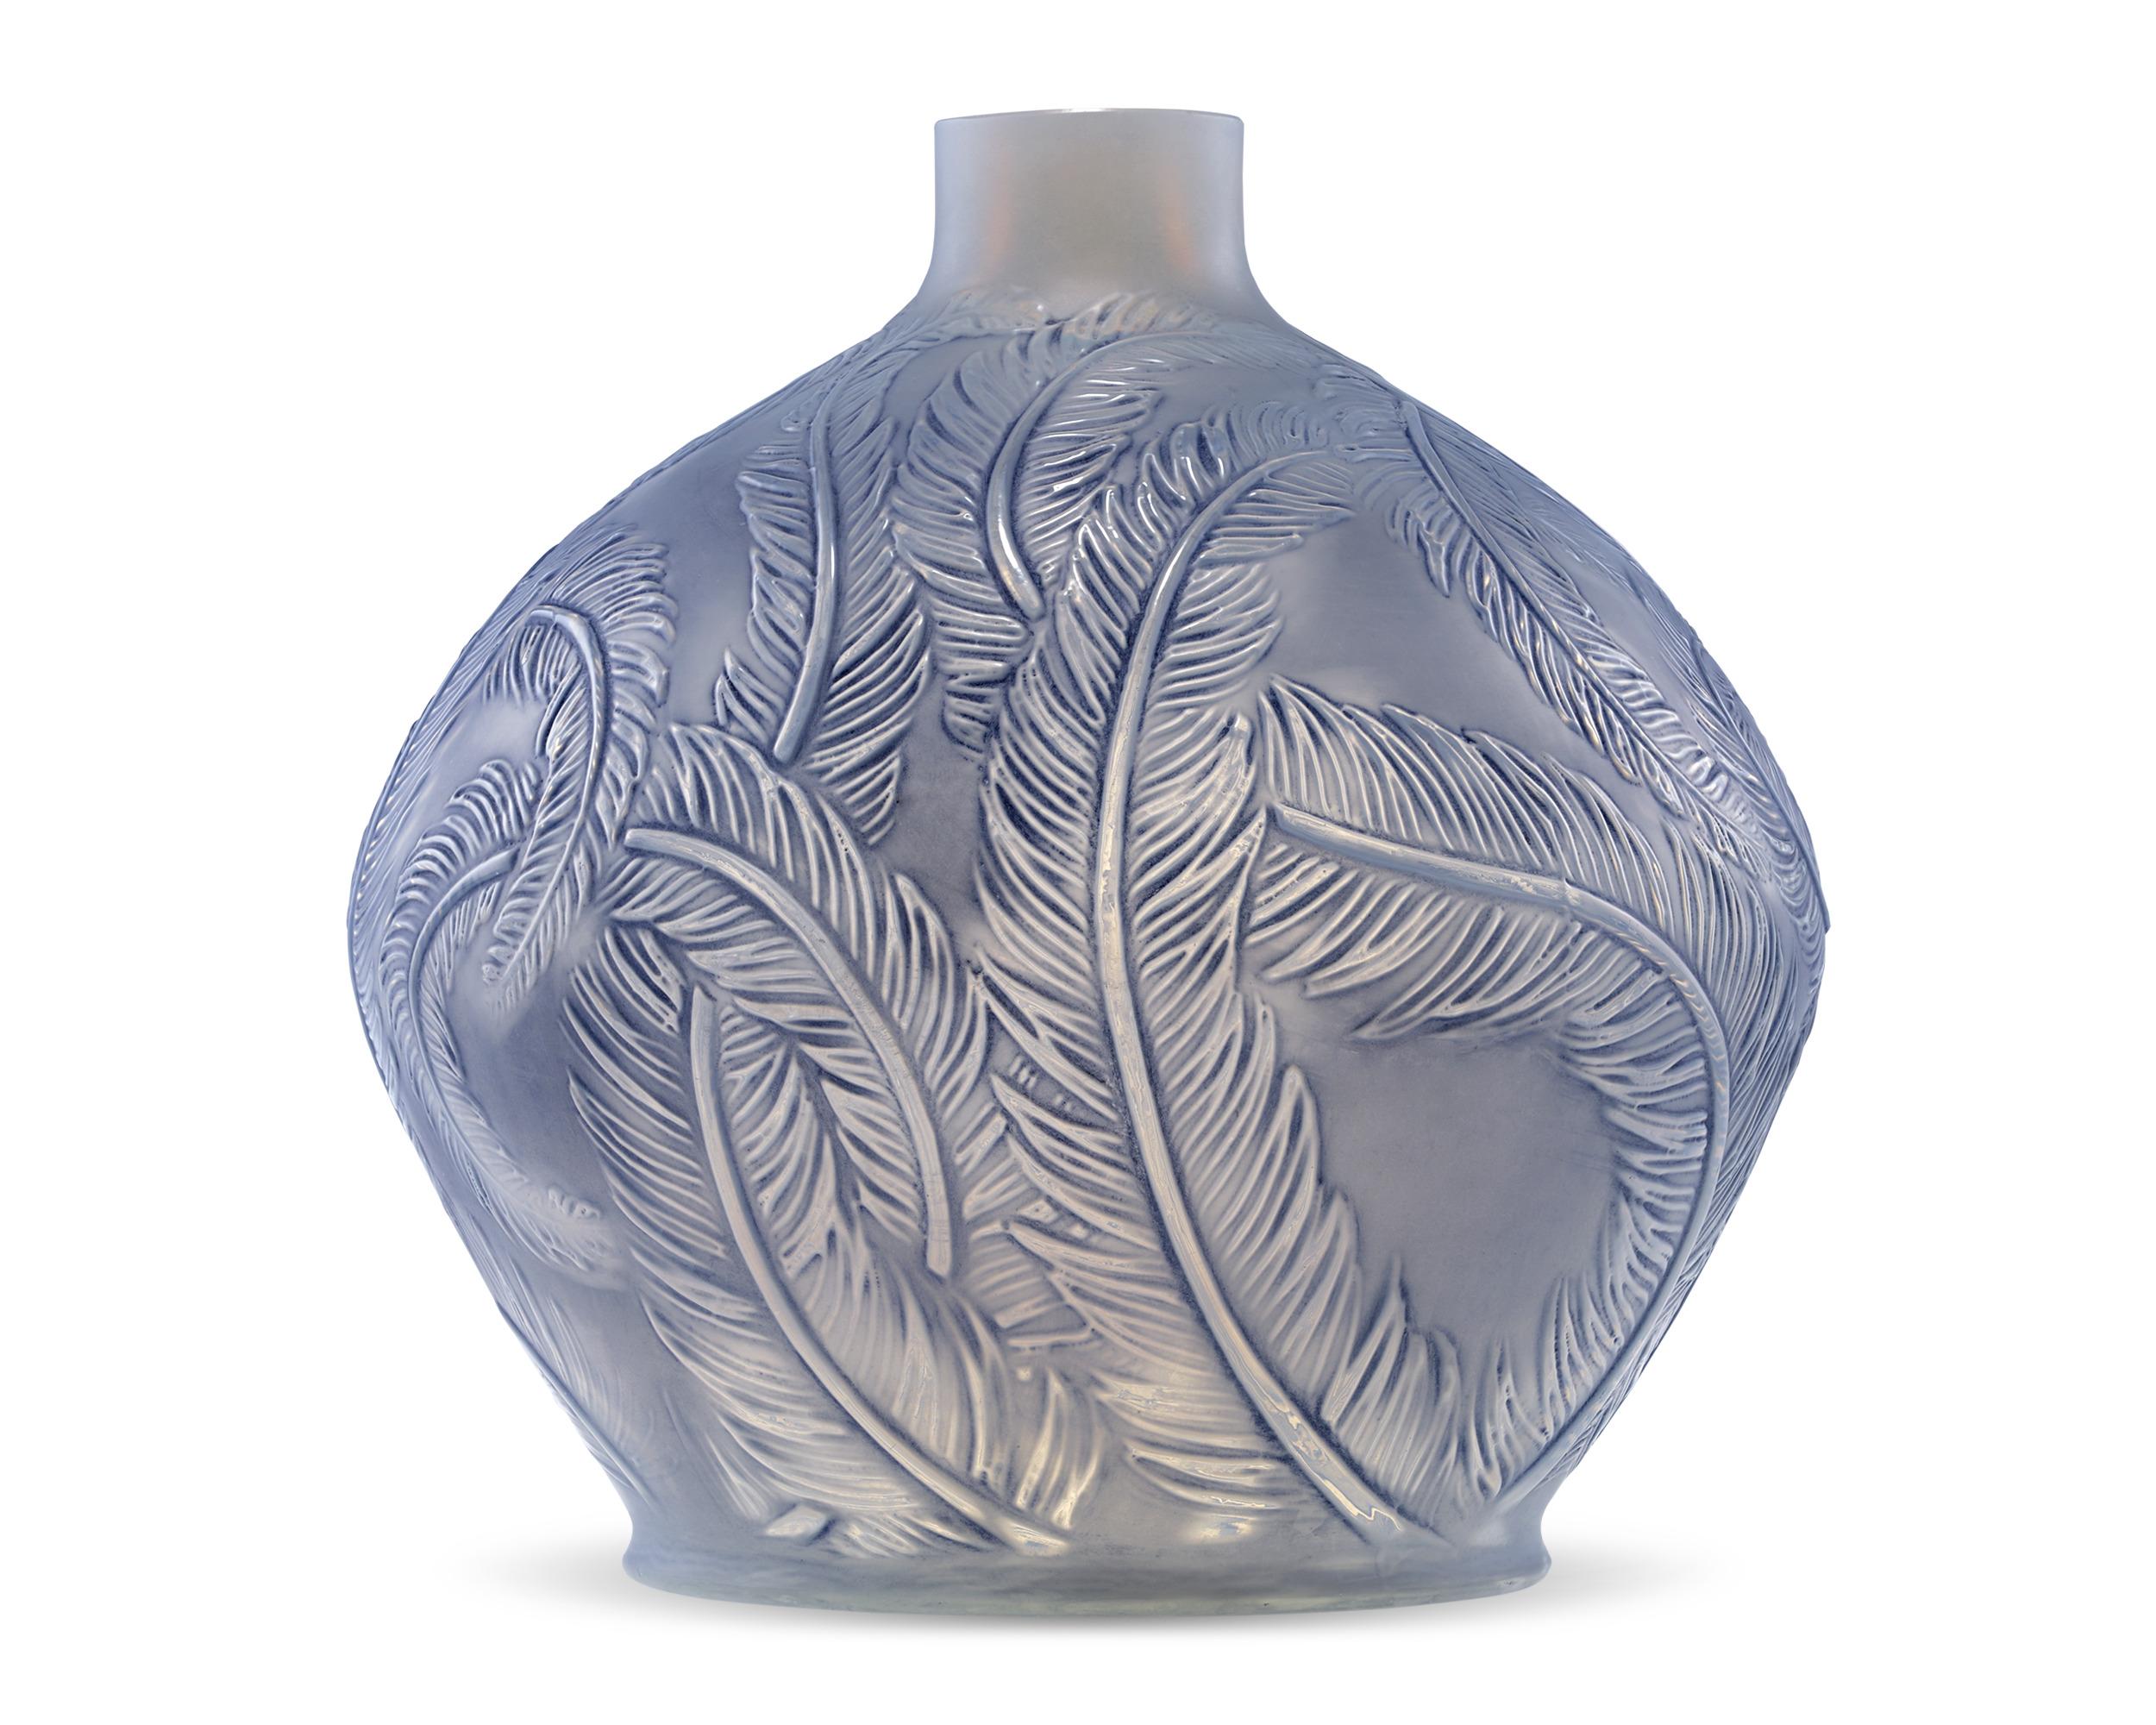 Made by the legendary René Lalique, this art glass vase, crafted of opalescent and blue stained glass, celebrates nature. The design, created in 1920 and known as the Plumes vase, is enveloped in expertly etched intertwining feathers against a blue